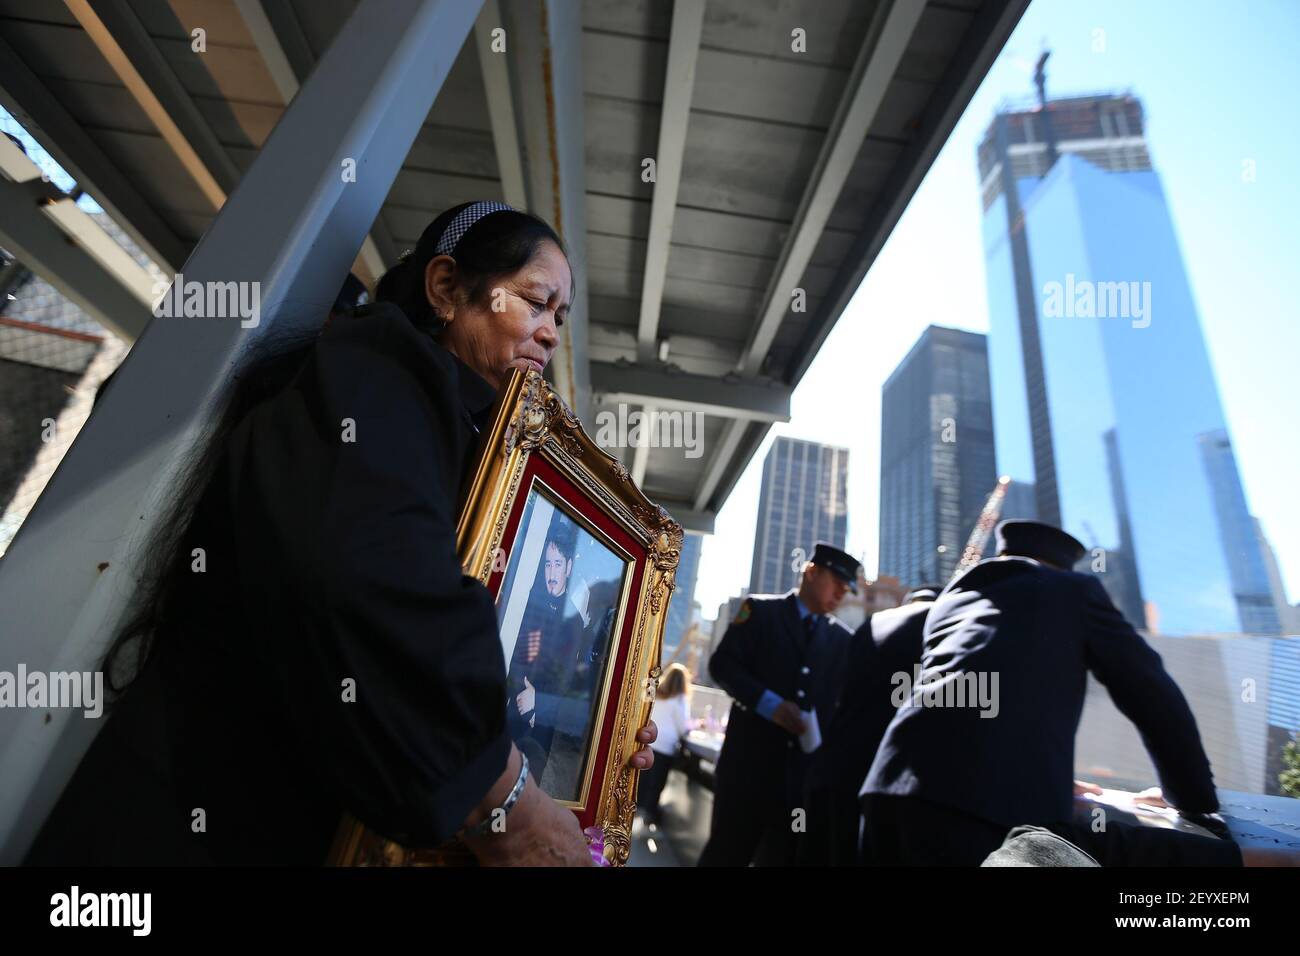 11 September 2012 - New York, NY - Julia Rivas cried and held her son's picture, Moises N. Rivas who worked at the World Trade Center during Commemoration Ceremony of the 11th Anniversary of September 11th by the North Pool at World Trade Center. The building on the right is 2 World Trade Center being built. Photo Credit: Chang W. Lee/Pool/Sipa Press Stock Photo